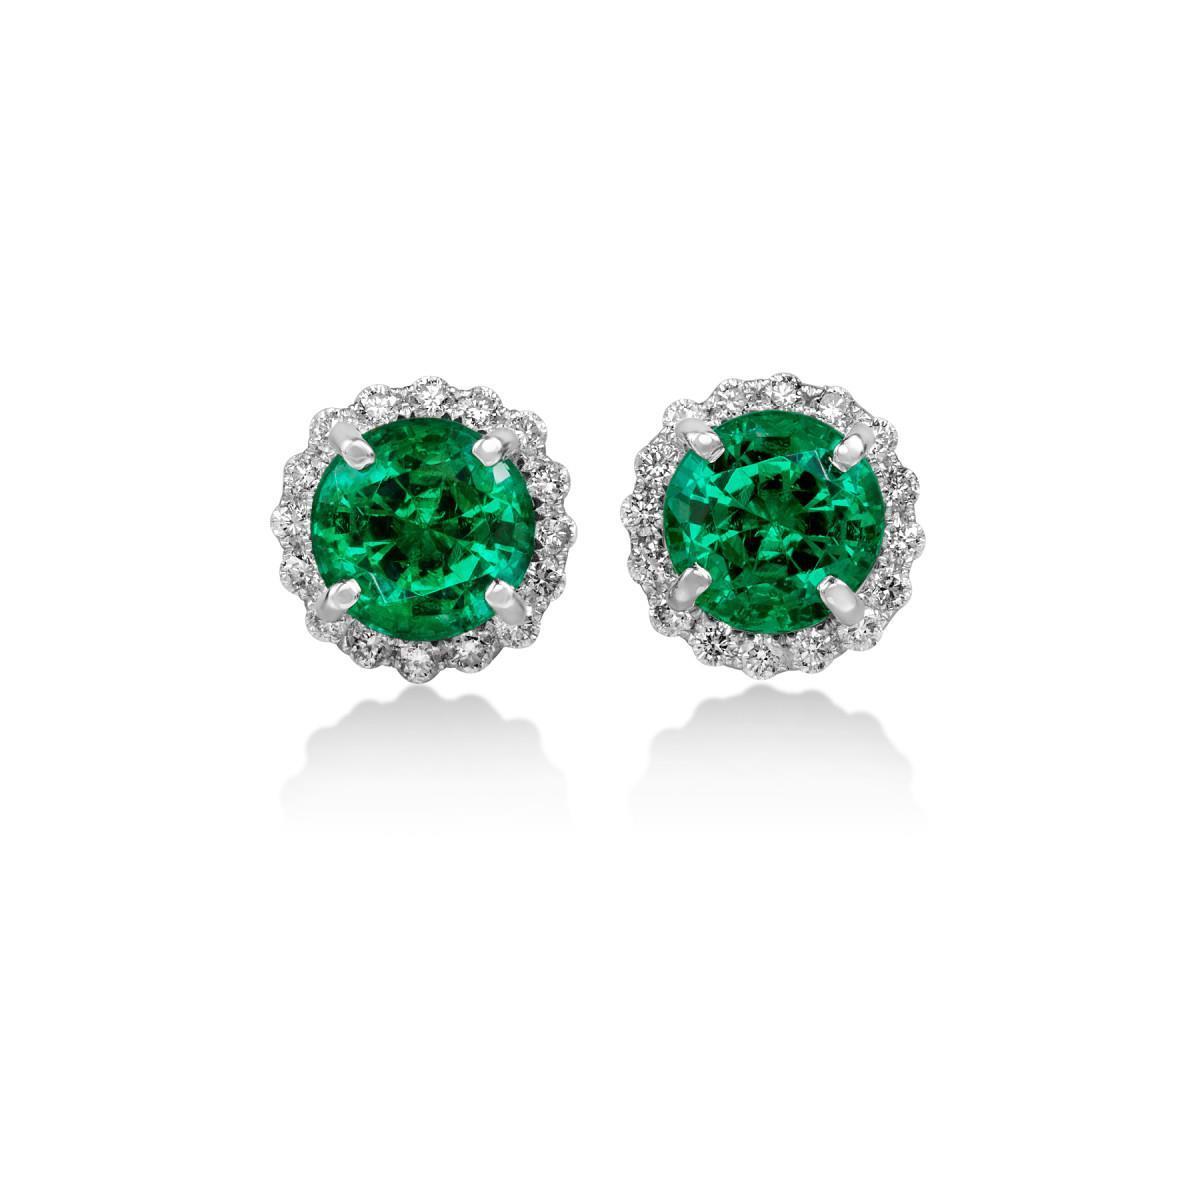 Harry Chad Enterprises 61658 7.30 CT Round Emerald with Diamonds Stud Earring, 14K White Gold